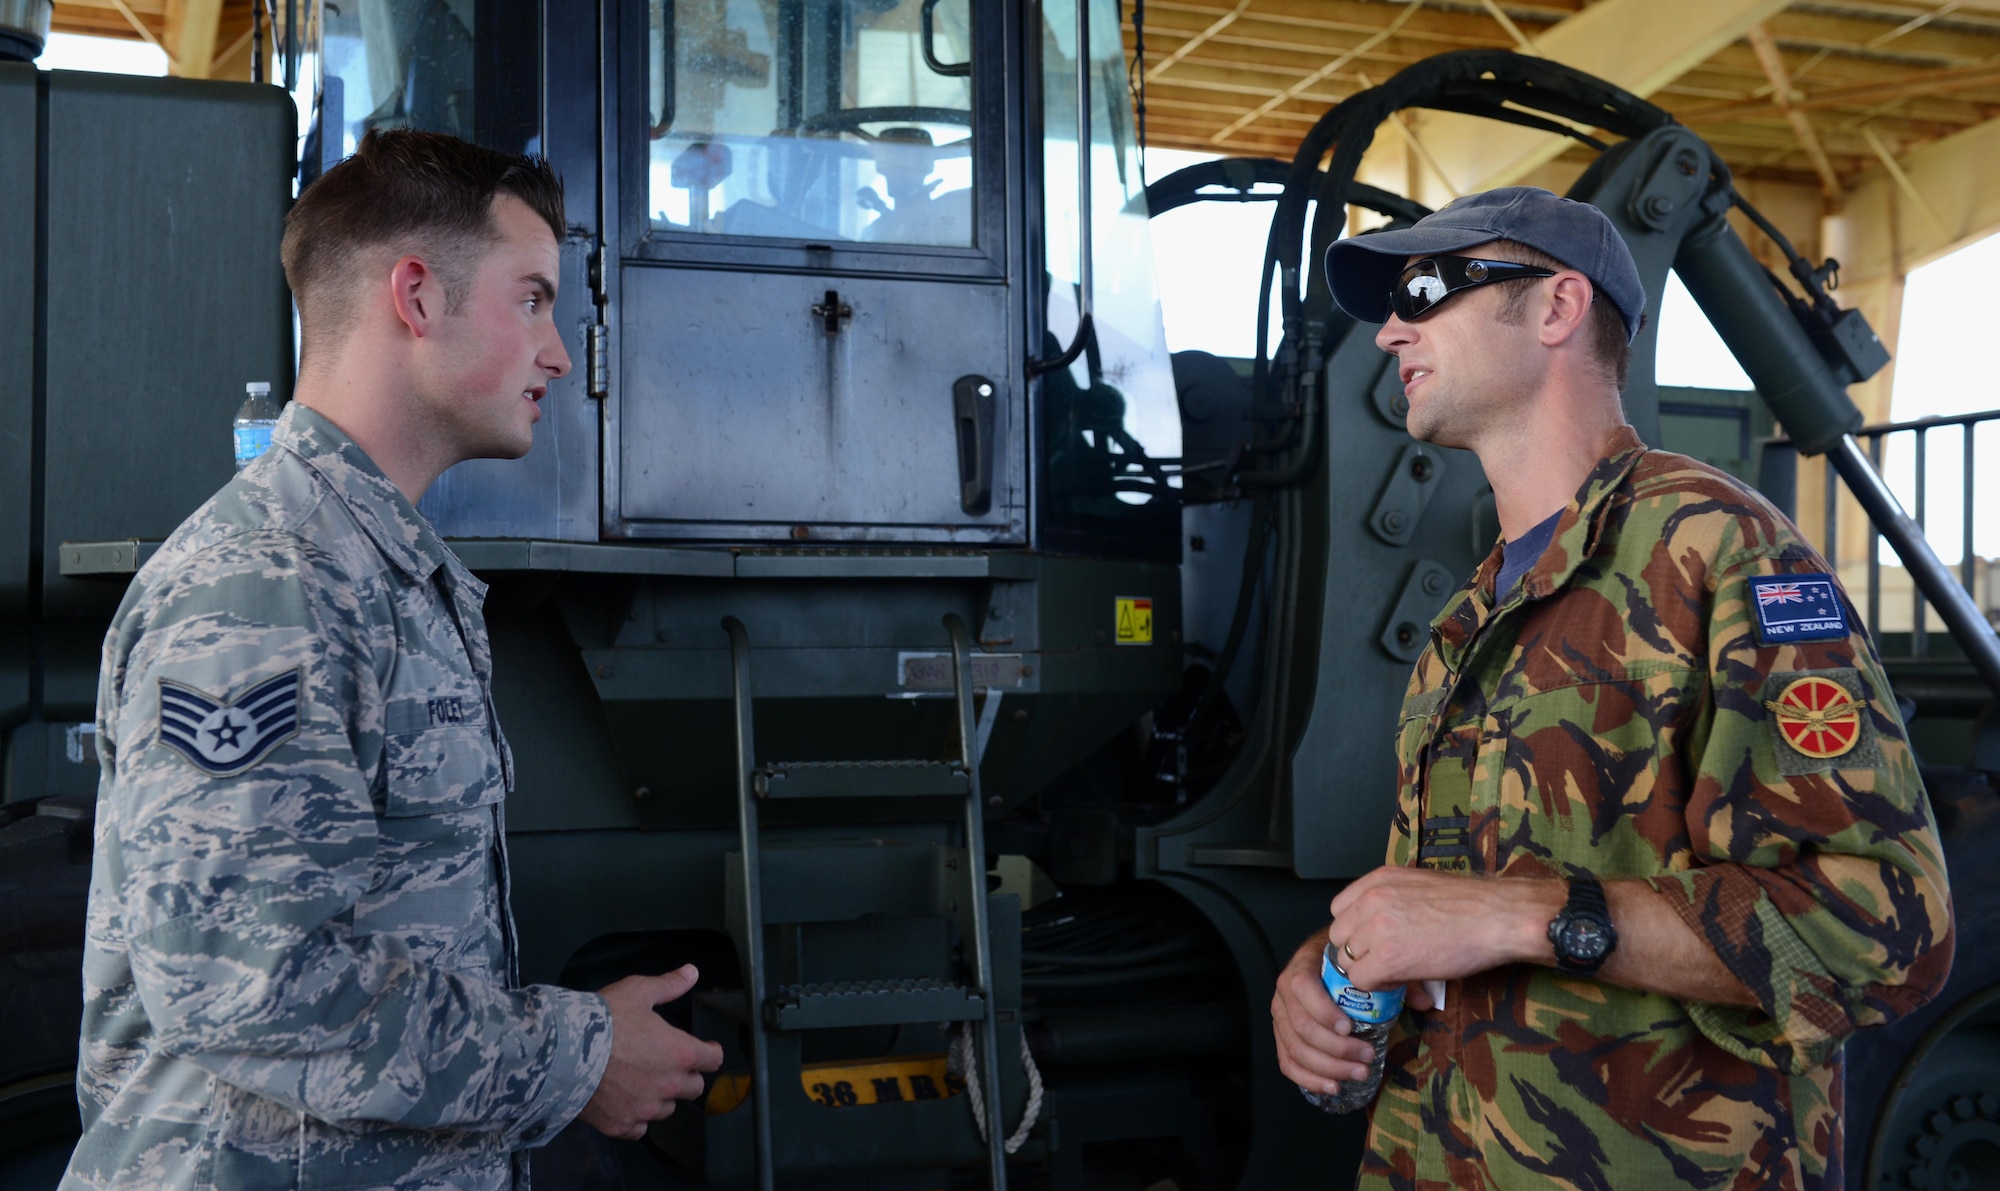 U.S. Air Force Staff Sgt. Joshua Foley, 36th Mobility Response Squadron aerial port supervisor, and Royal New Zealand Air Force Squadron Leader Brandon Purdue, operations squadron representative, discuss operational capabilities during Pacific Agility 16-1 March 15 , 2016, at Andersen Air Force Base, Guam. Pacific Agility is a Pacific Air Forces-led engagement focusing on a series of logistics subject-matter expert exchanges designed to increase partner capabilities, military relations and regional stability for the Indo-Asia-Pacific region. (U.S. Air Force photo by Airman 1st Class Arielle Vasquez/Released)